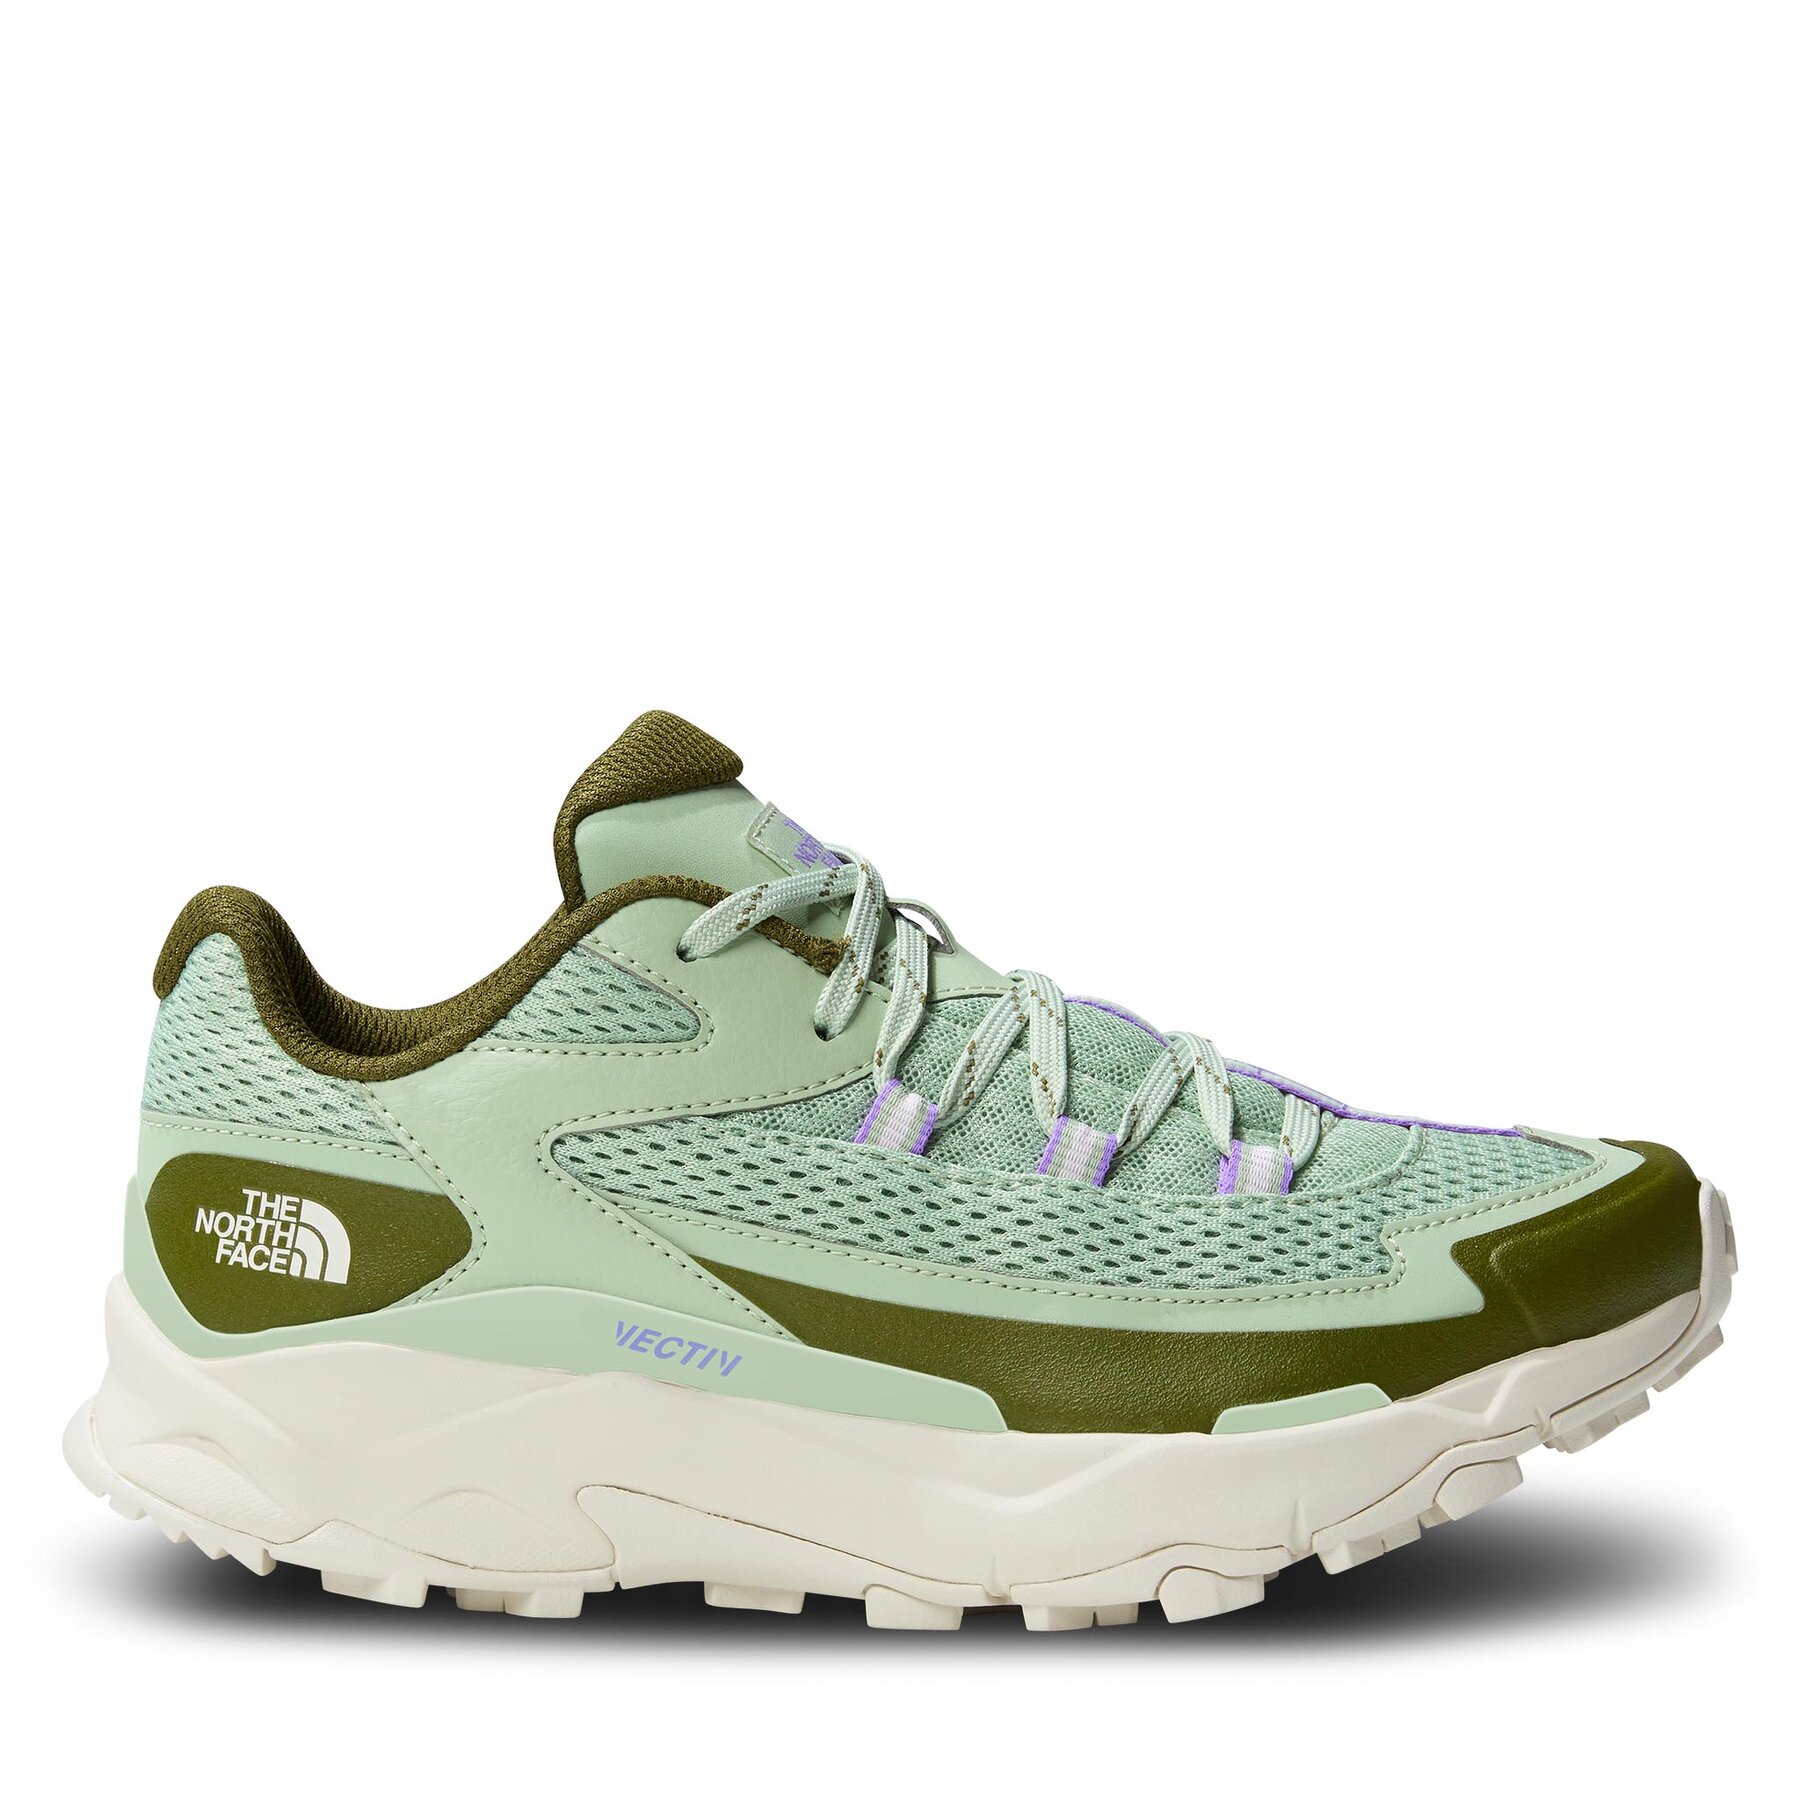 Sneakers The North Face Vectiv Taraval Misty NF0A52Q2SOC1 Sage/Forest Olive von The North Face